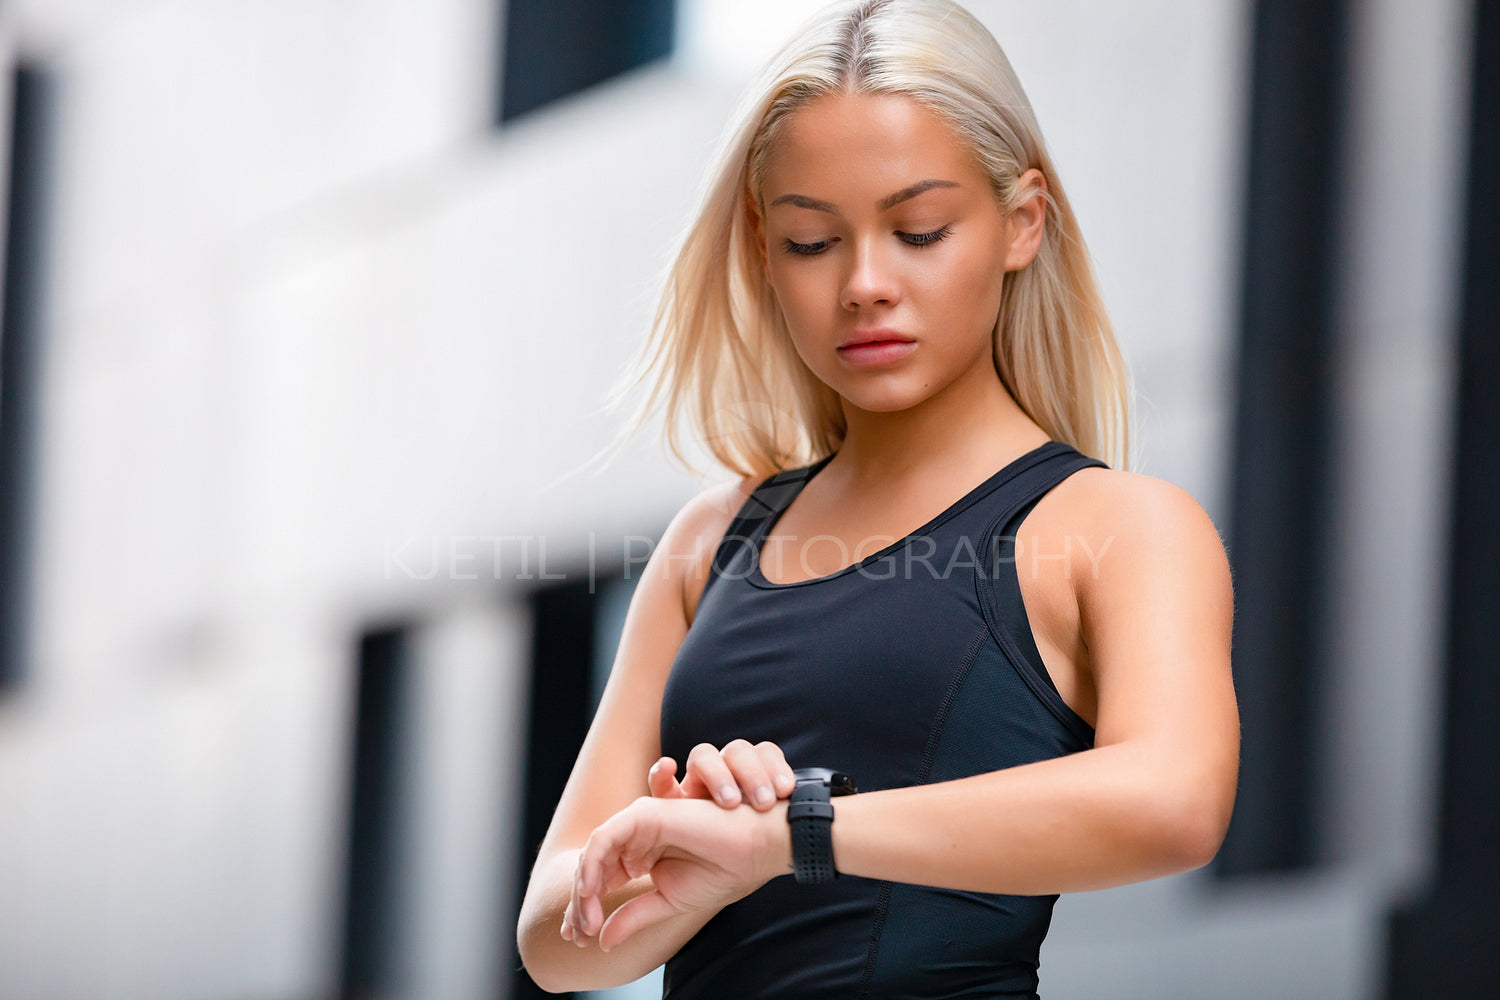 Woman Checking Heart Rate Using Smart watch After Workout